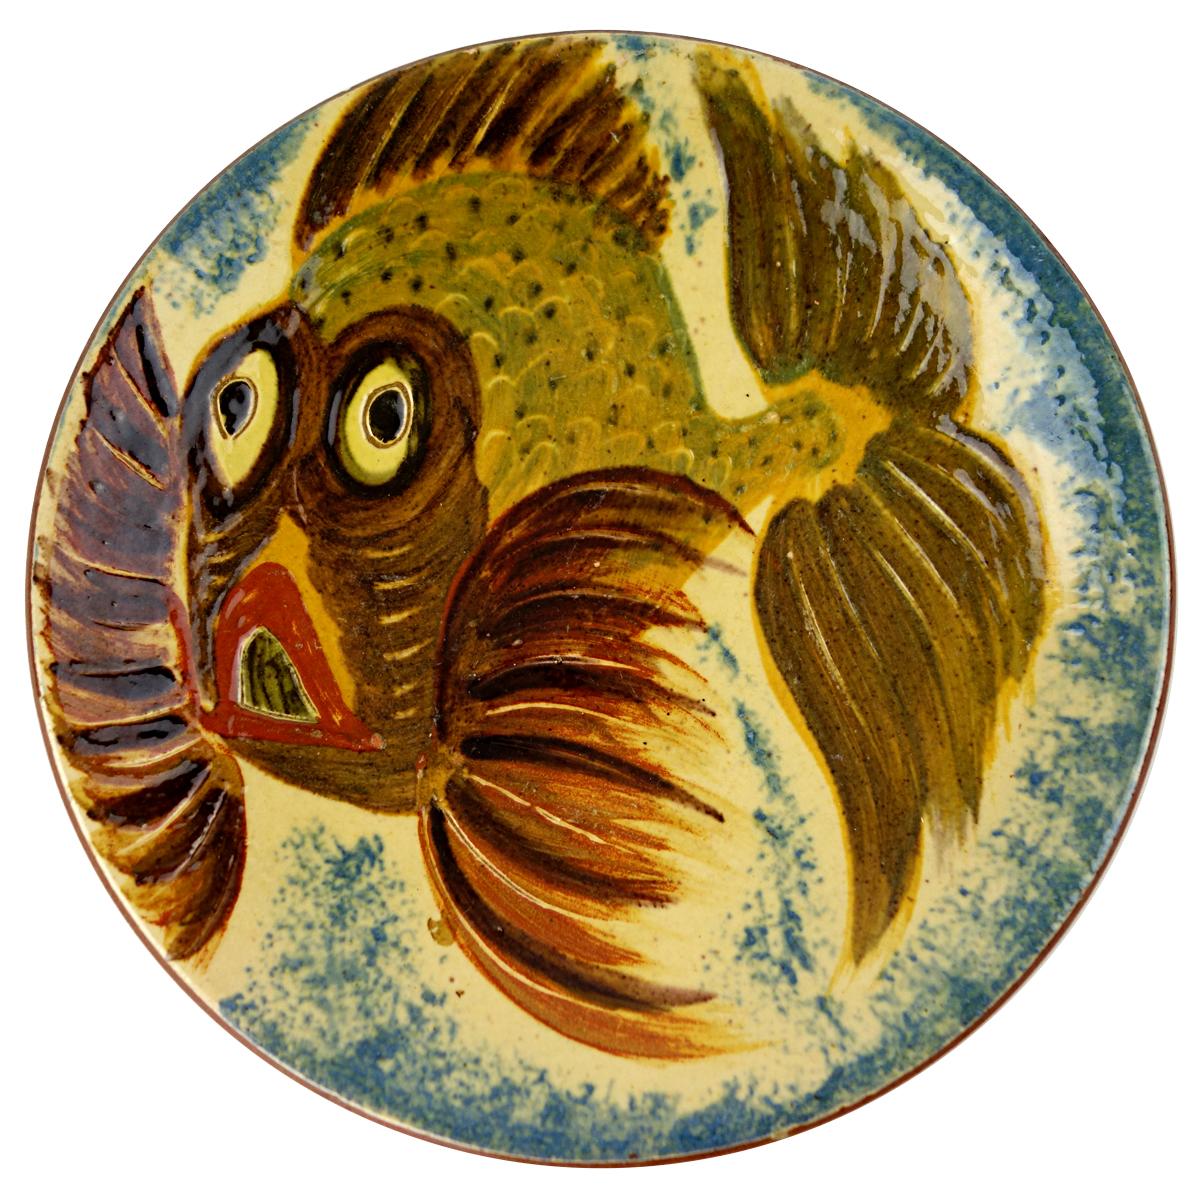 Very colorful and decorative set of four ceramic wall plates with stylized fishes. It was designed and made by Puigdemont of Spain.
Three plates have a diameter of 9.4 inches, the fourth has a diameter of 8.1 inches.